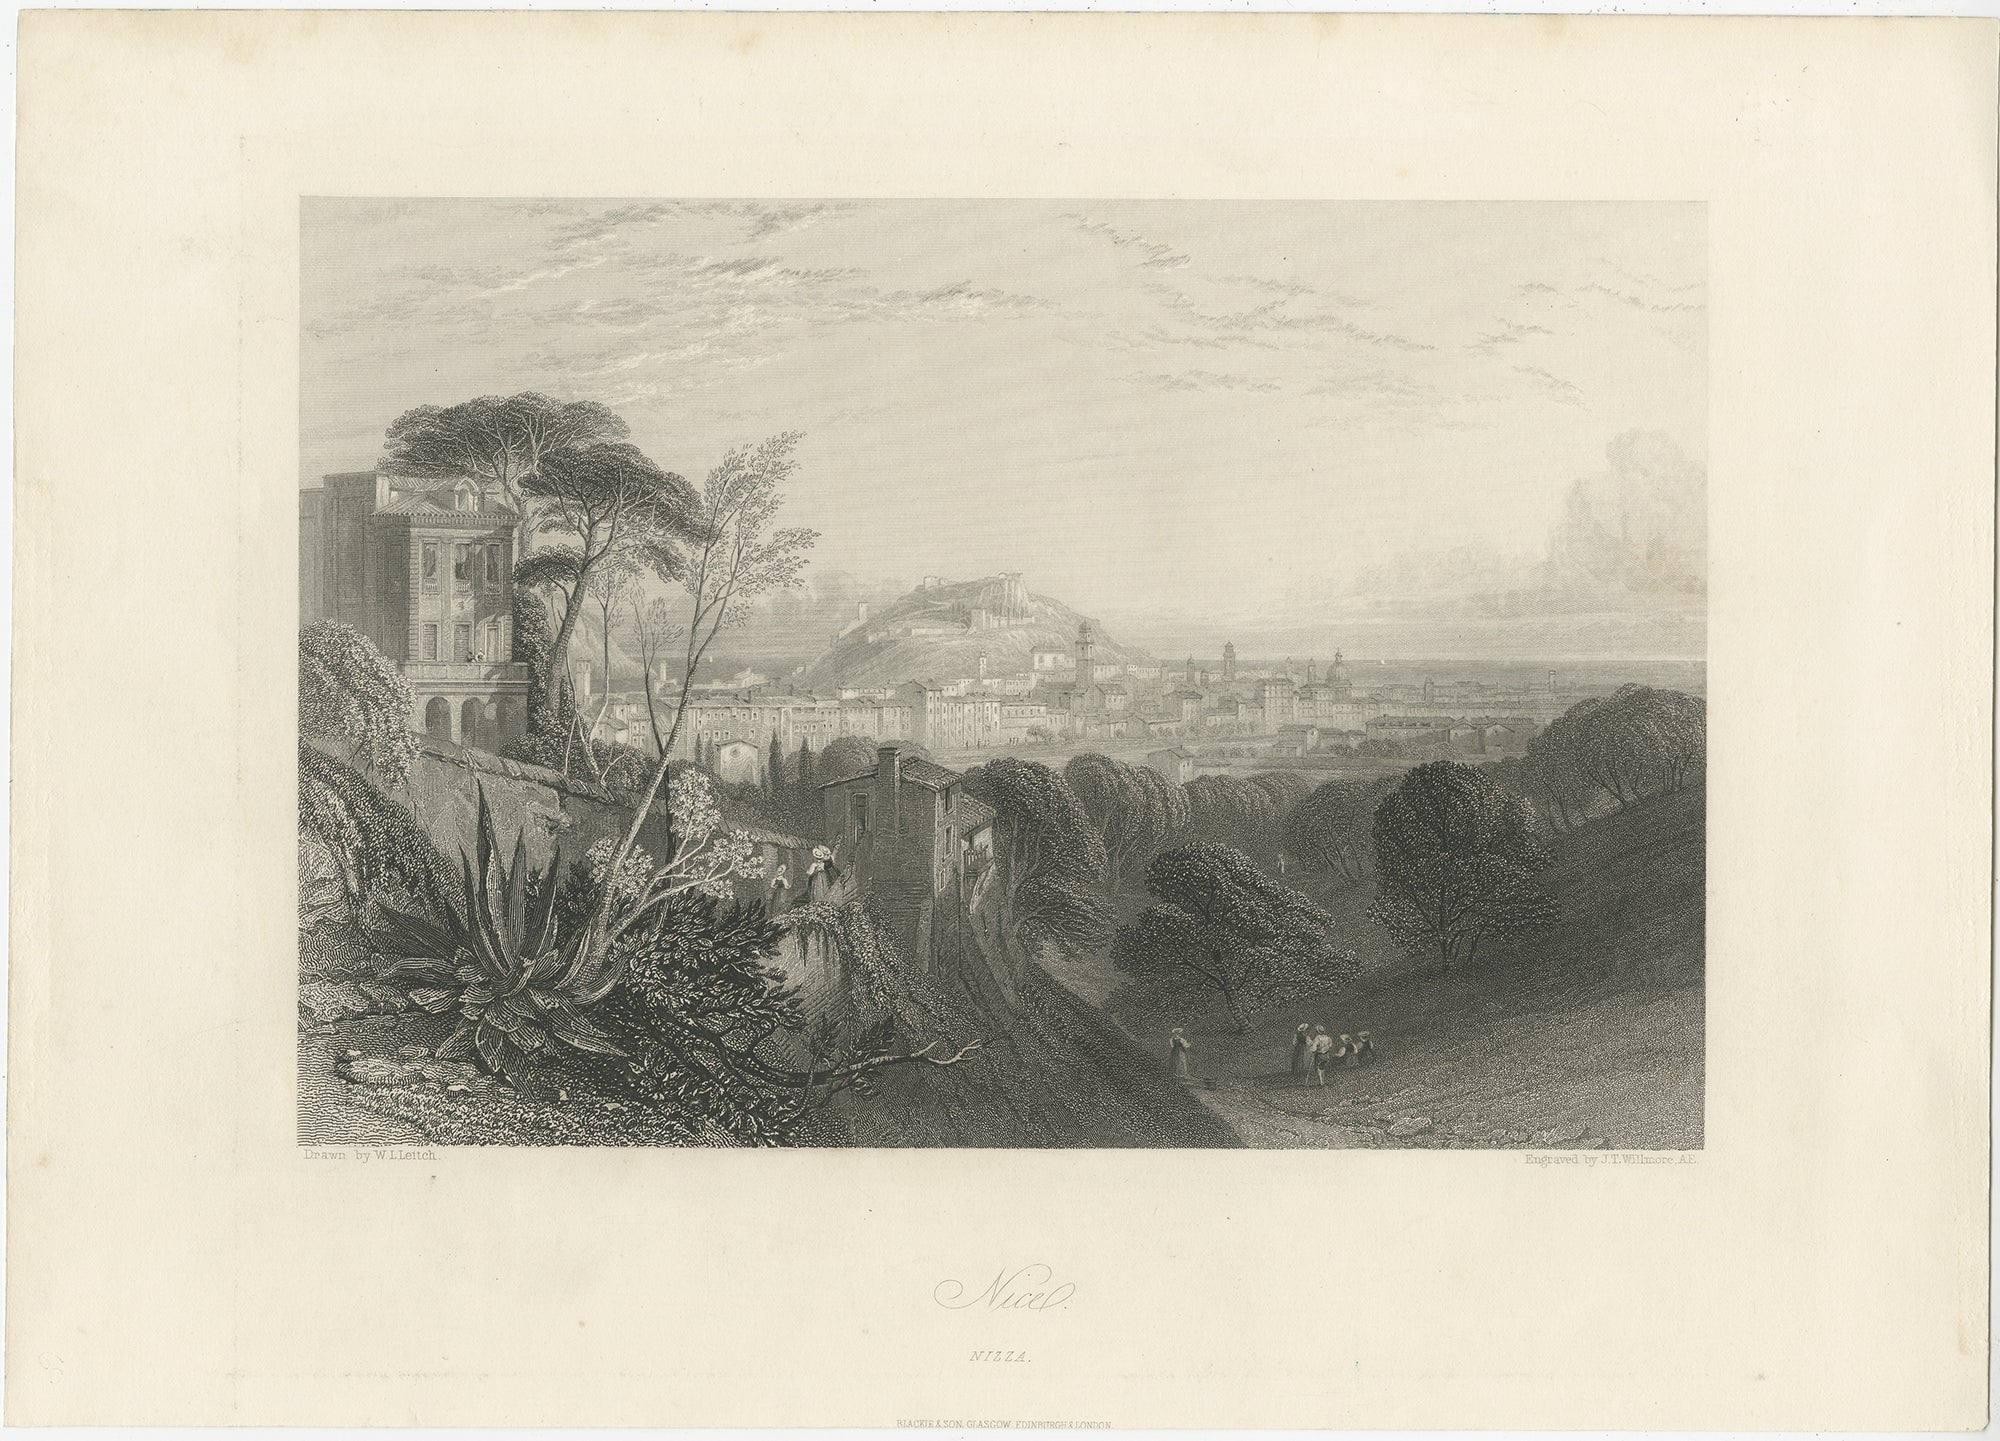 Antique print titled 'Nice, Nizza'. View of the city of Nice, France. This print originates from 'Italy, Classical, Historical and Picturesque' by Camillo Mapei.

Artists and Engravers: Engraved by J.T. Willmore. Published by Blackie &